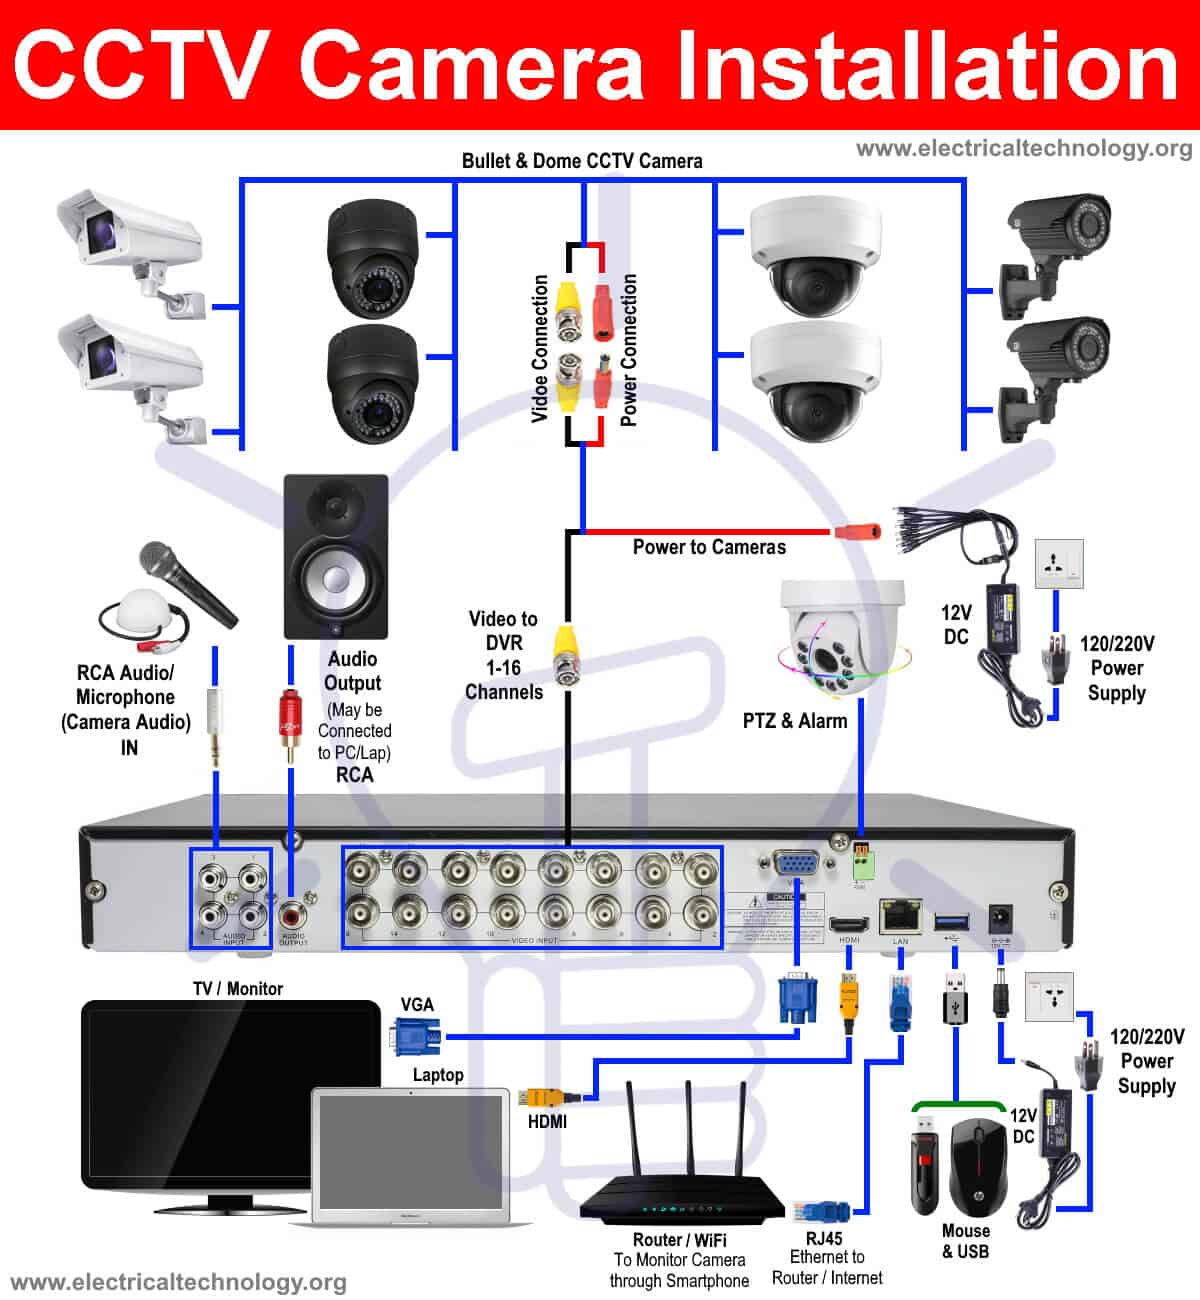 How to Install a CCTV Camera? CCTV Camera Installation with DVR  Cctv Camera Wiring Diagram    Electrical Technology